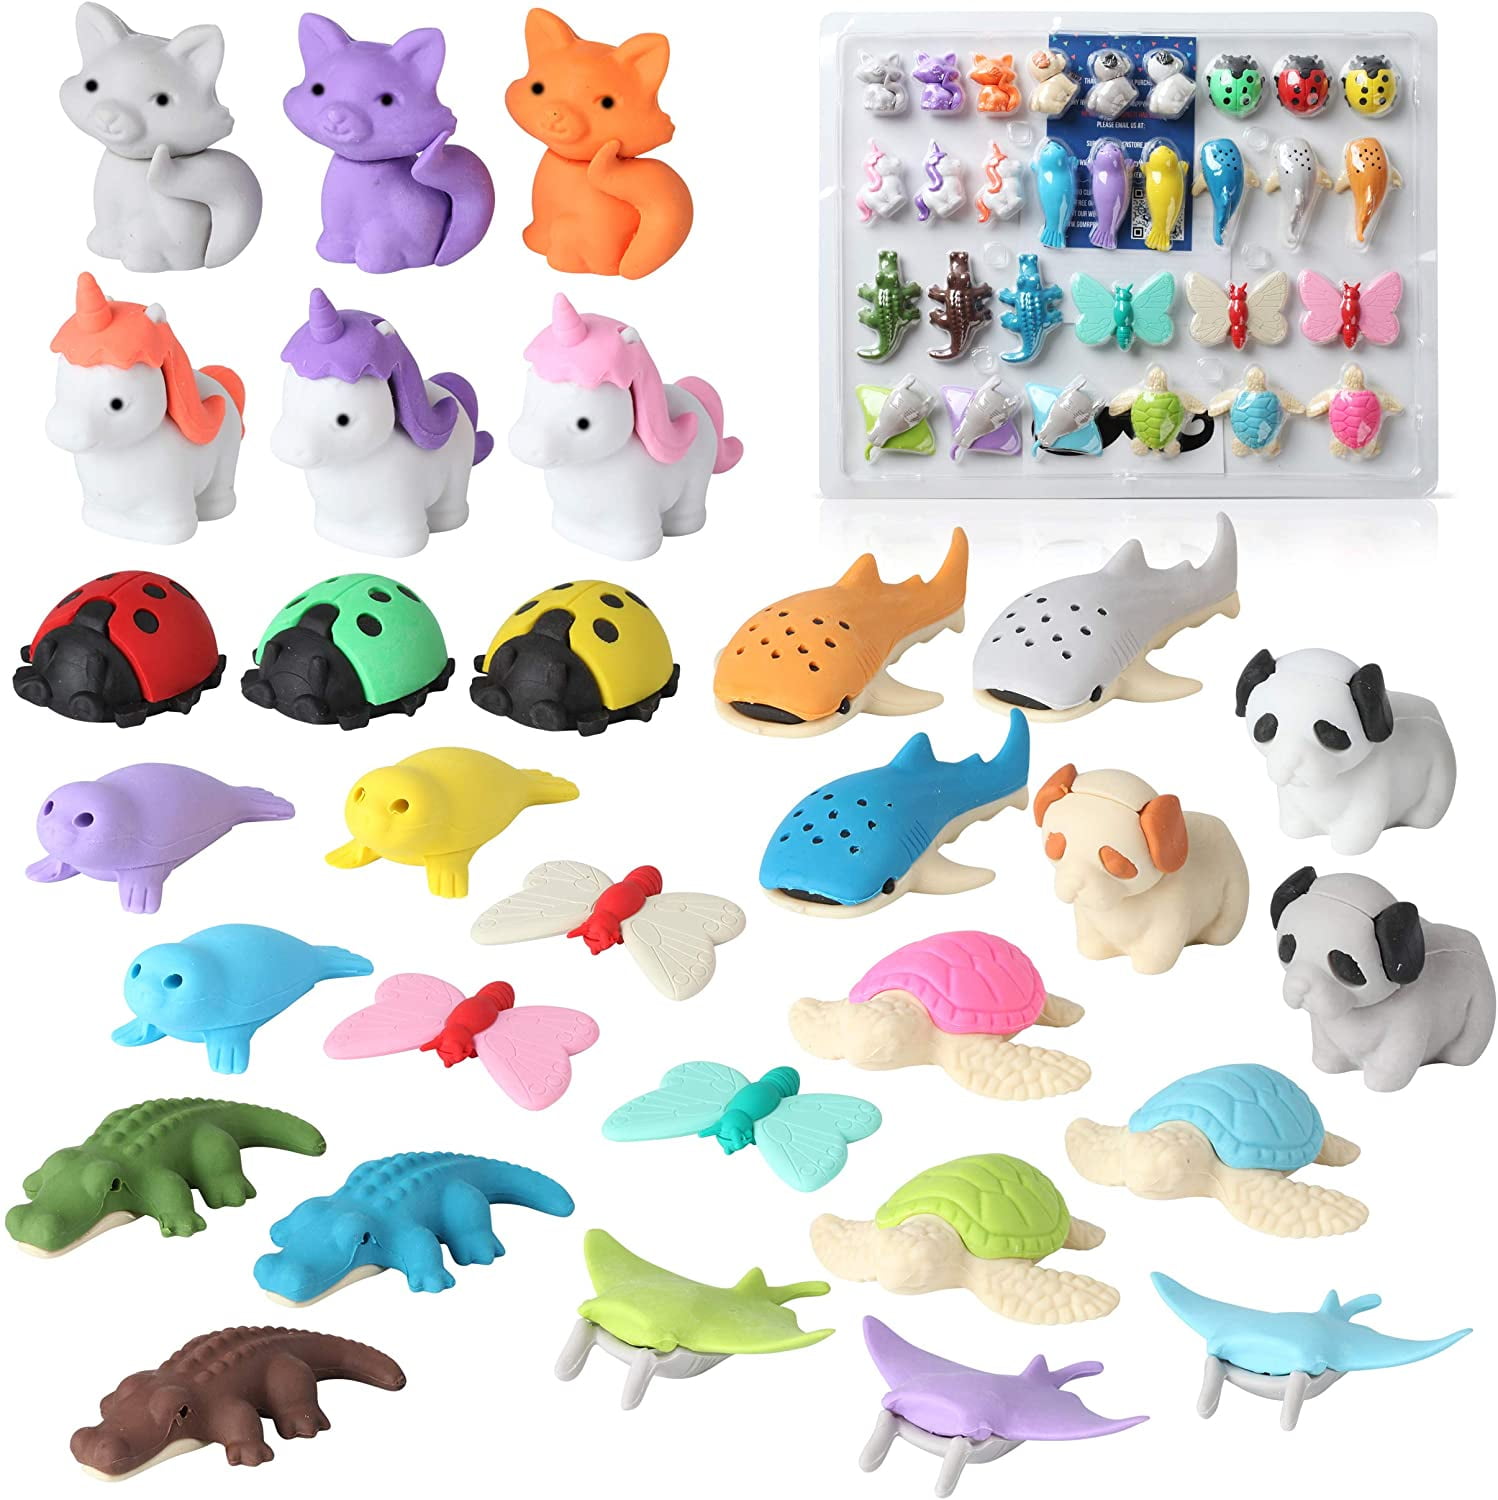 Japanese Iwako Erasers Animal Overstock Toy Kid Made in Japan New Pack of 20 